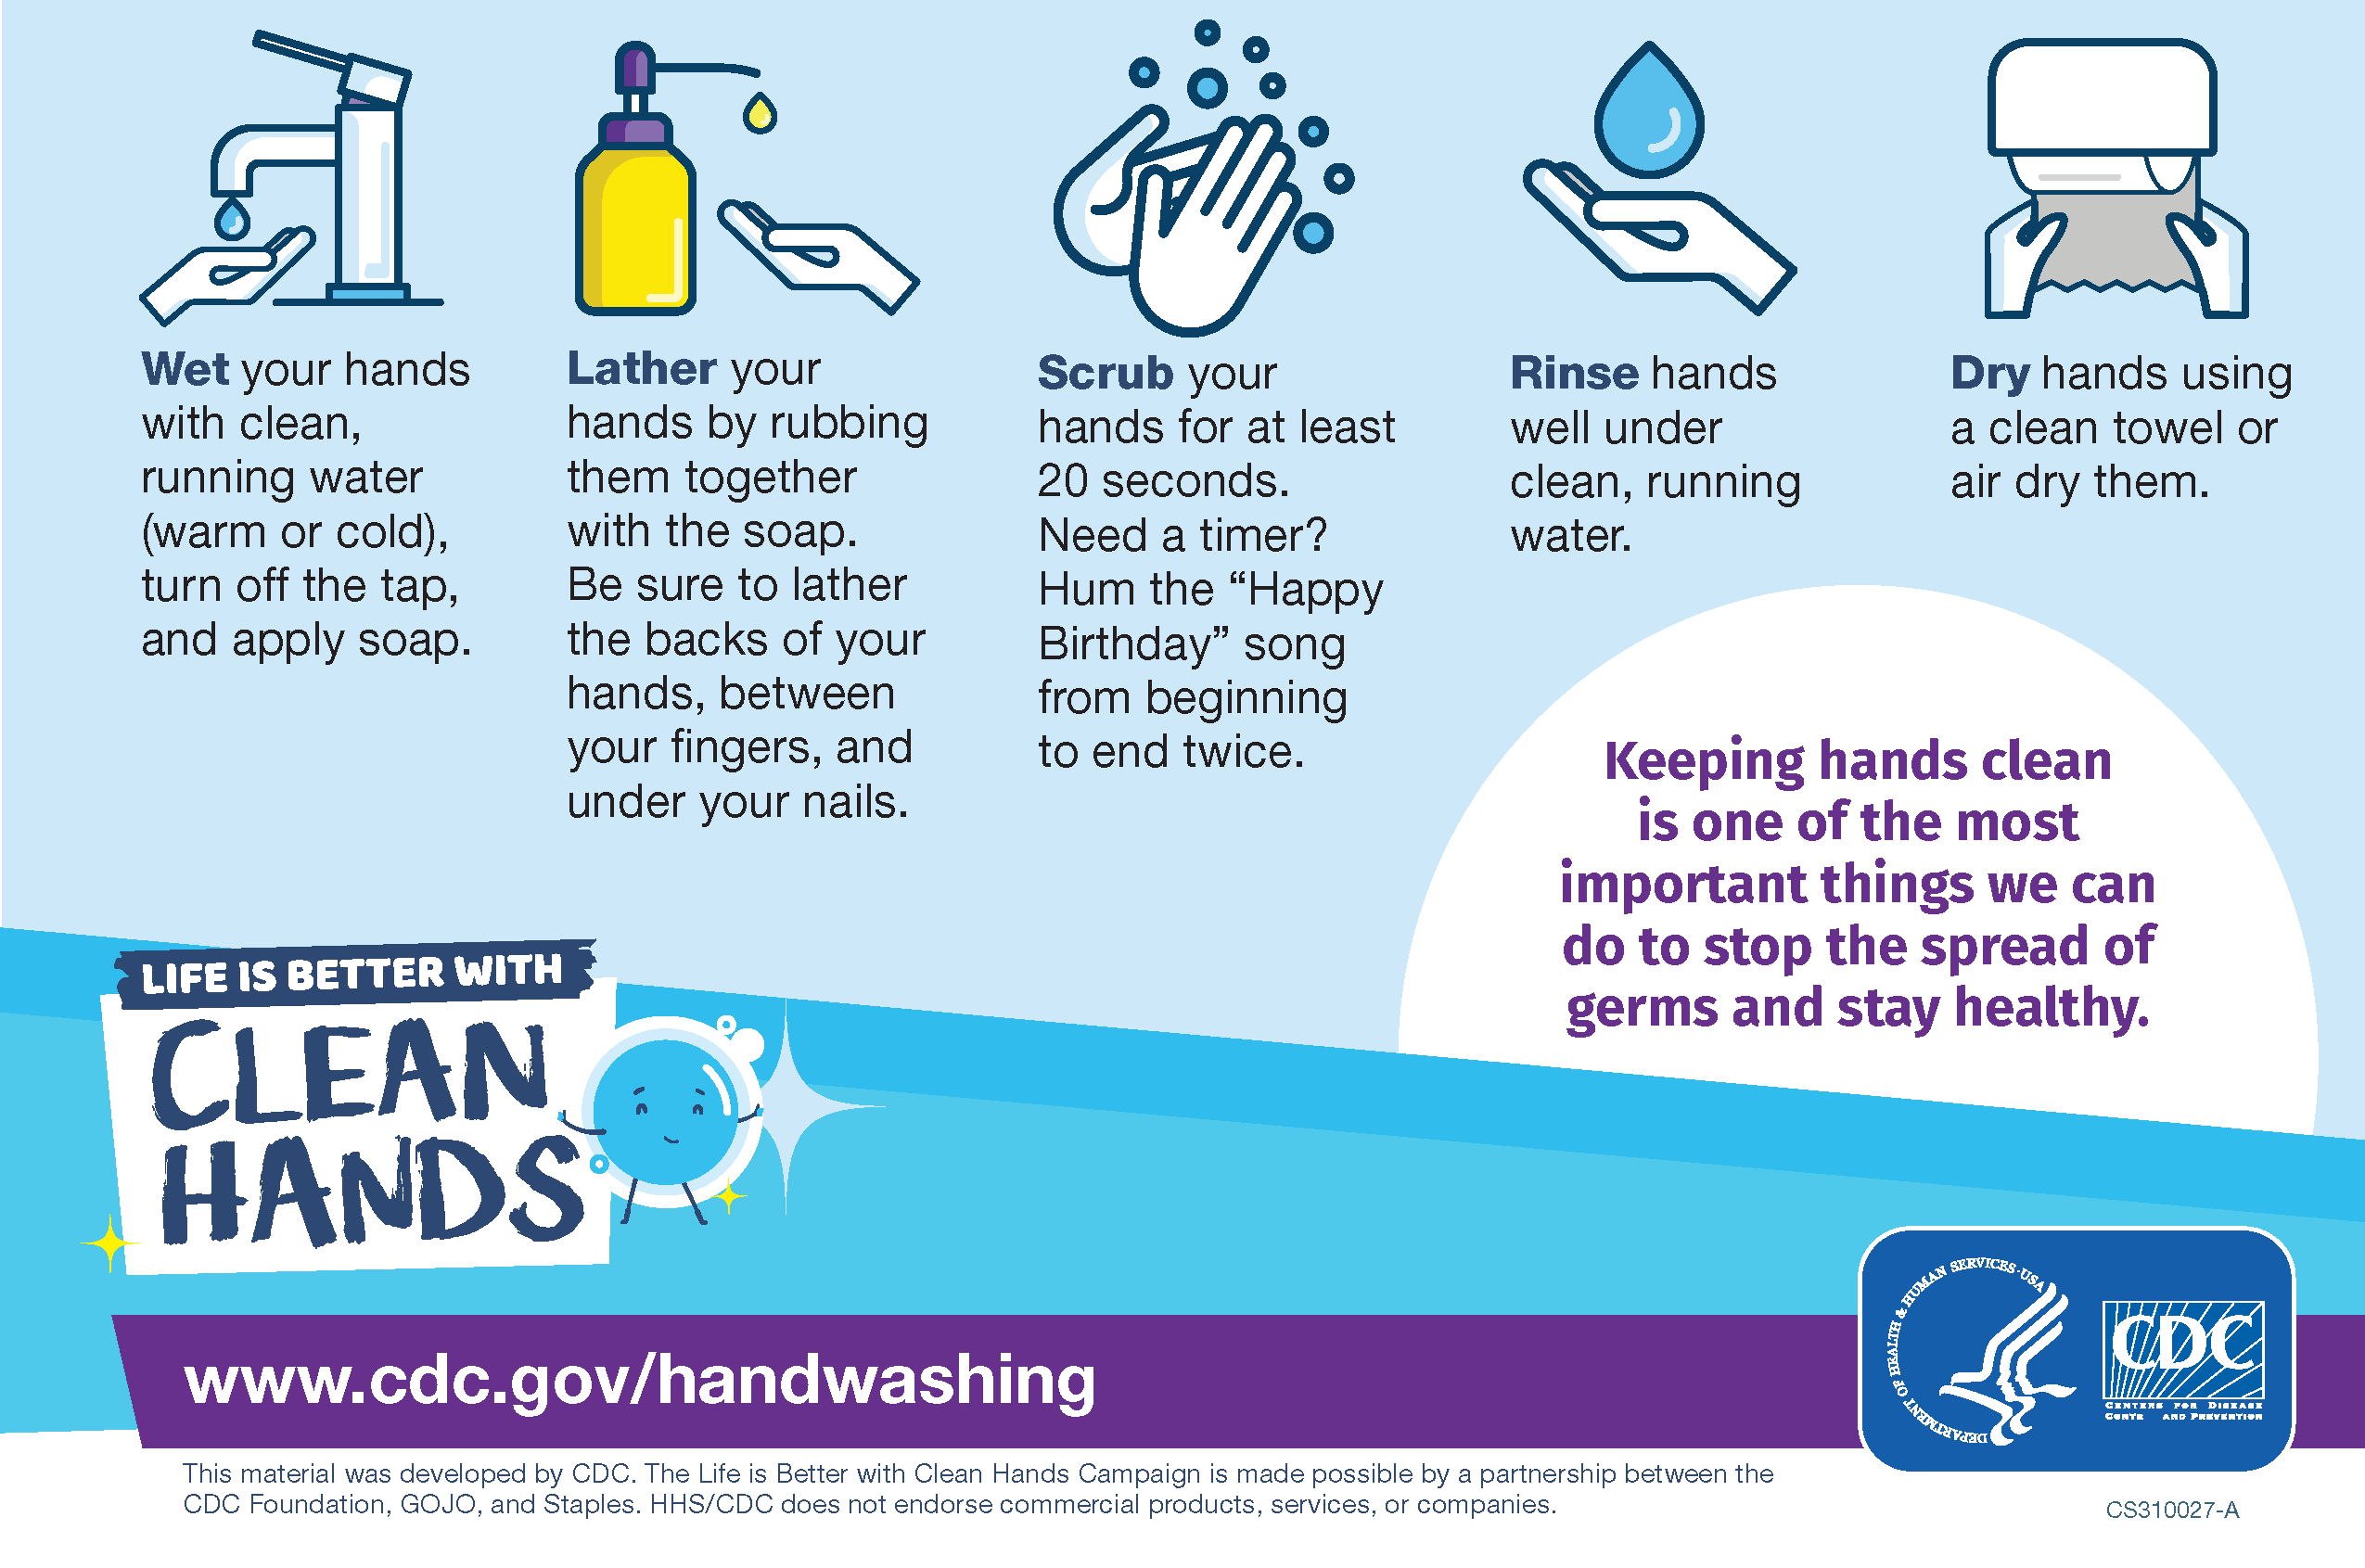 Handwashing Guide - wet hands, lather with soap, scrub for at least 20 seconds, rinse hands, dry hands